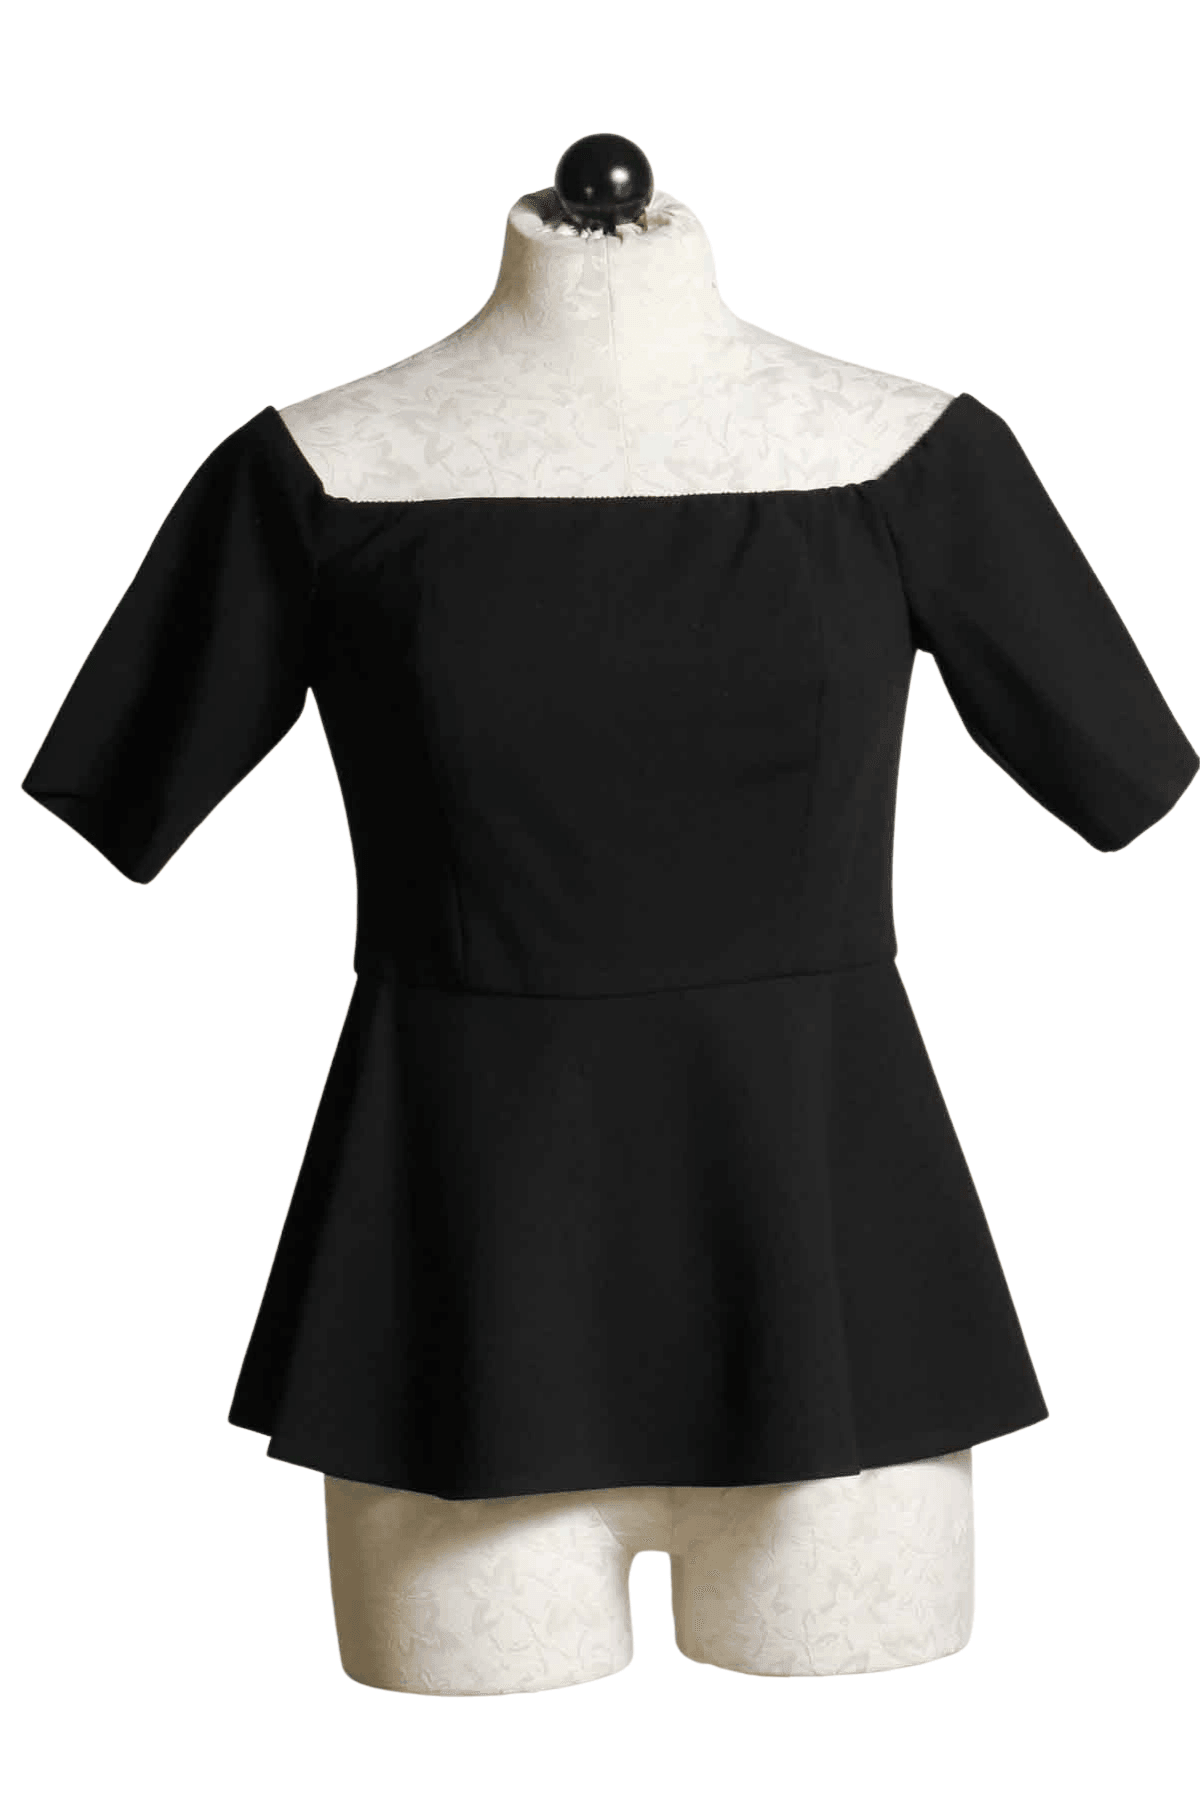 black Elegant fitted Off the shoulder Forbid Top by Trina Turk with a peplum bottom